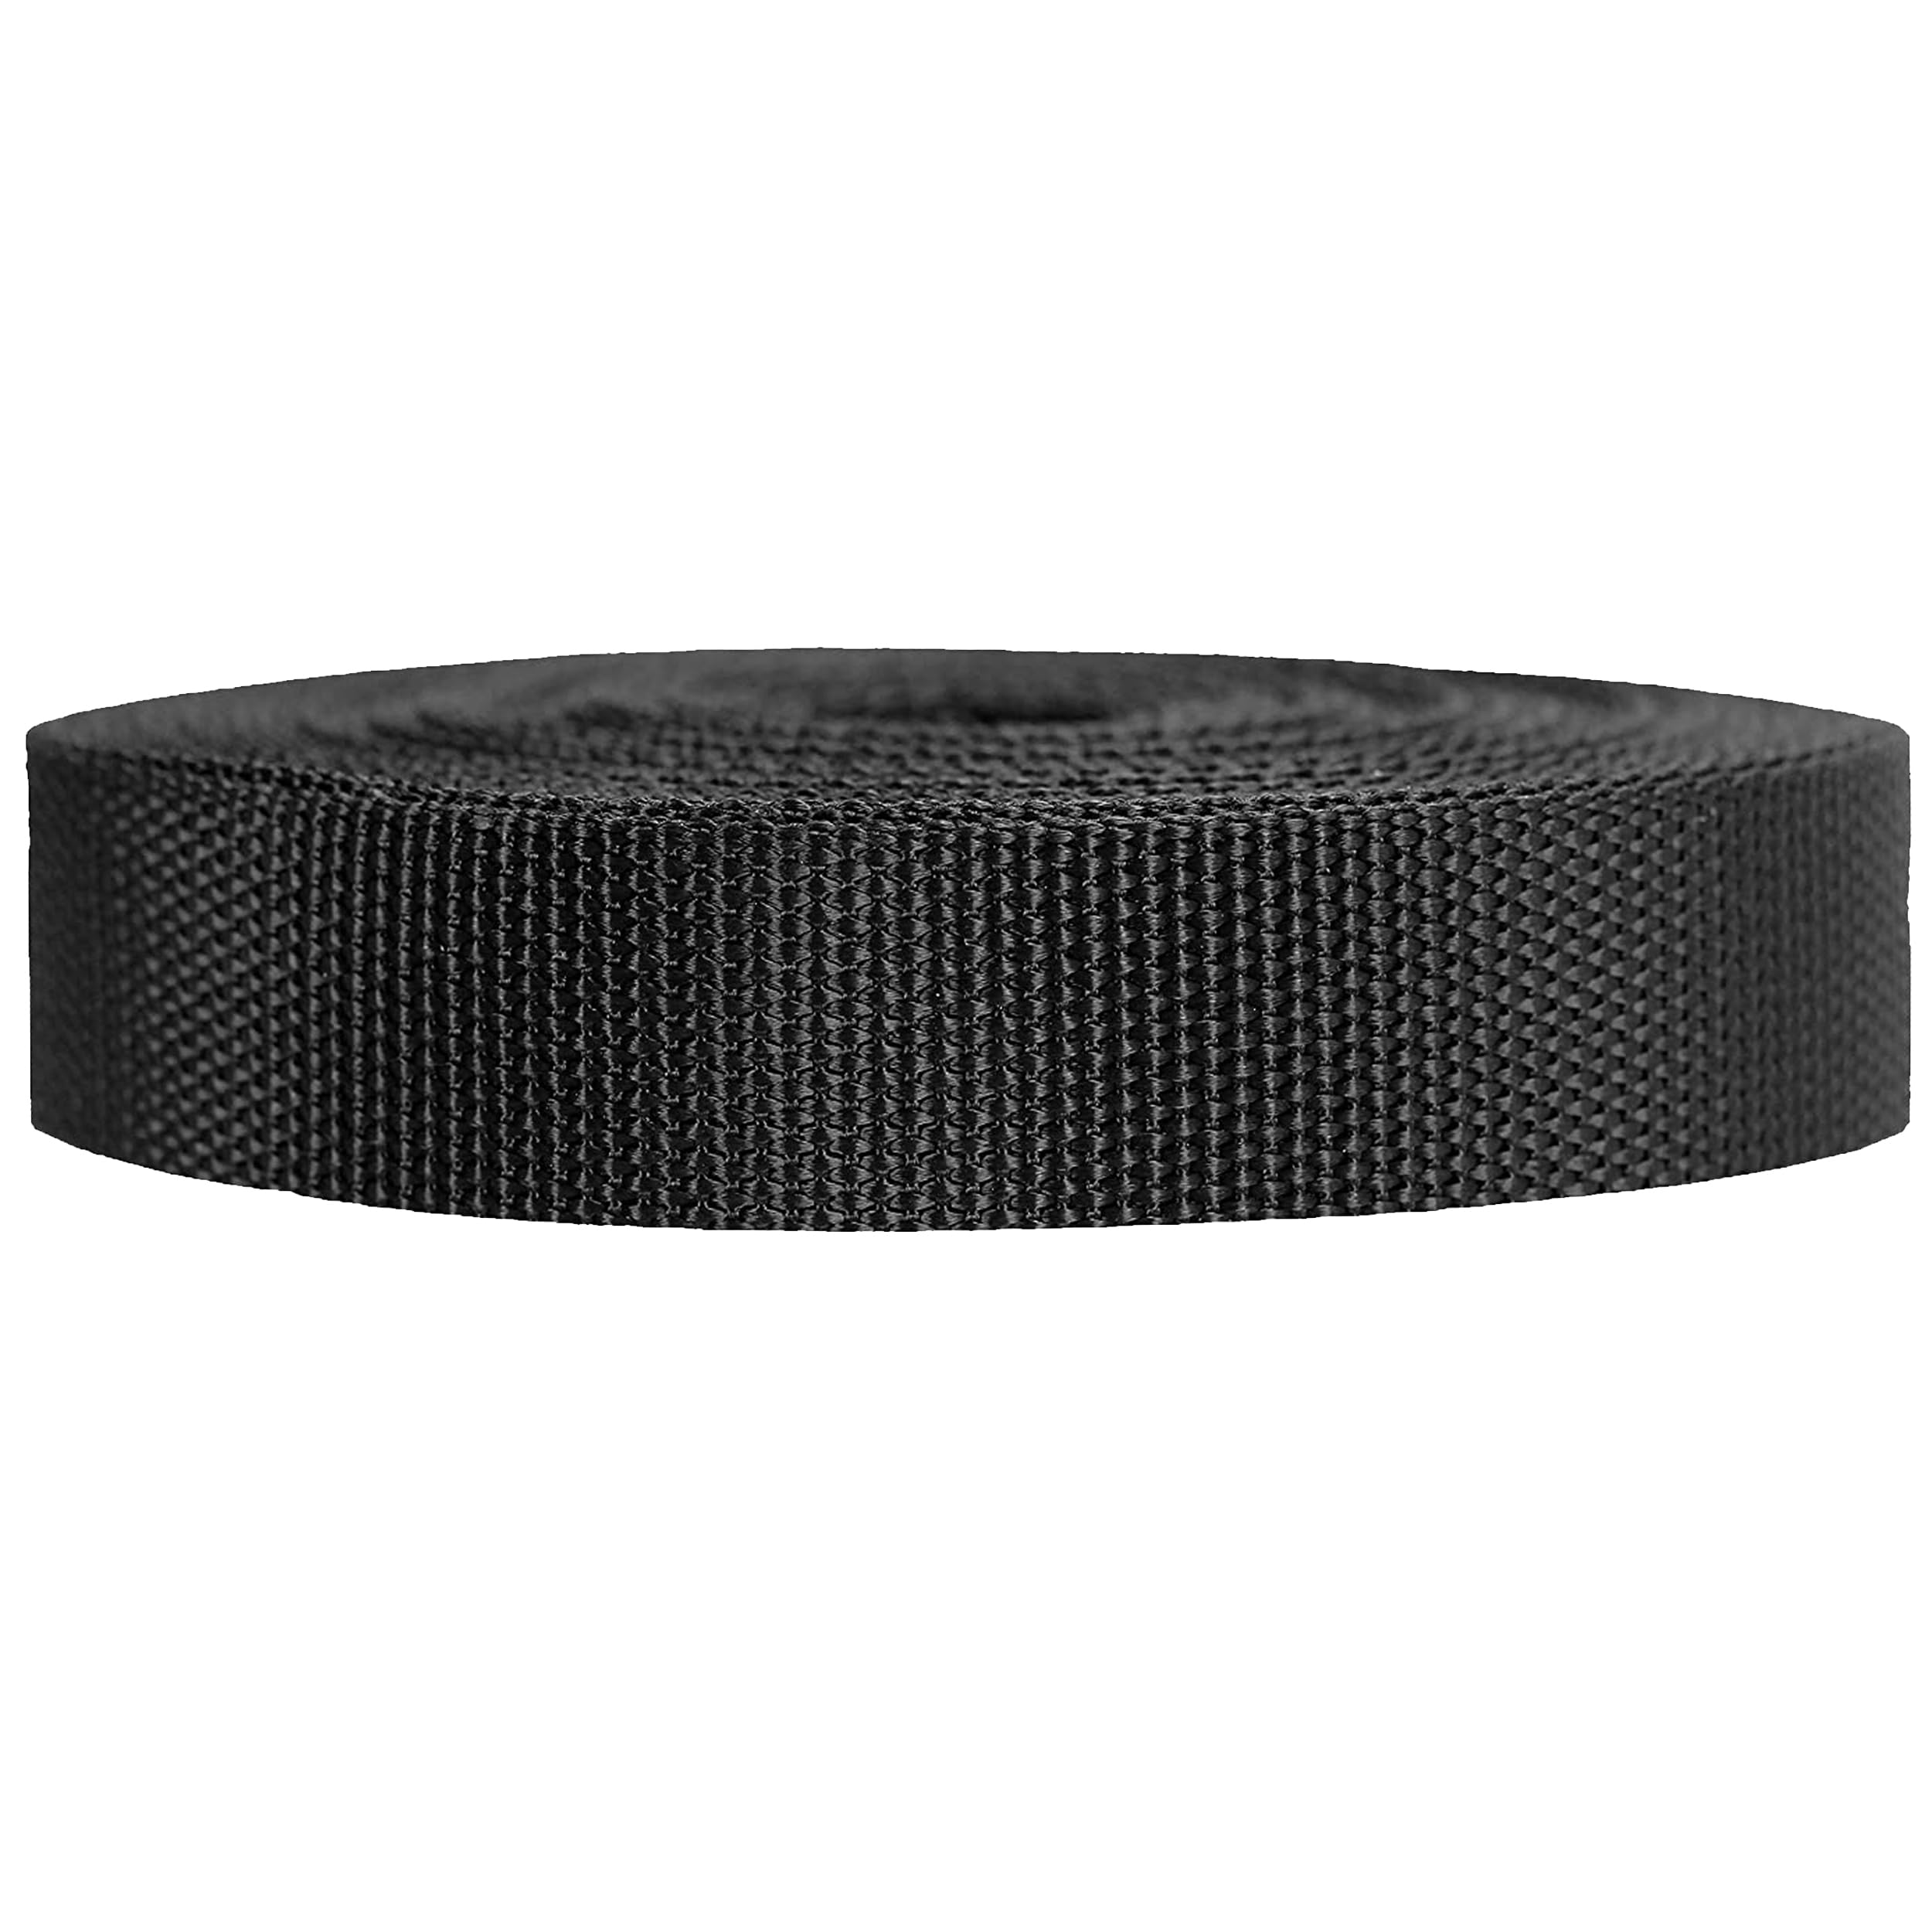 Strapworks Heavyweight Polypropylene Webbing - Heavy Duty Poly Strapping for Outdoor DIY Gear Repair, 3/4 Inch